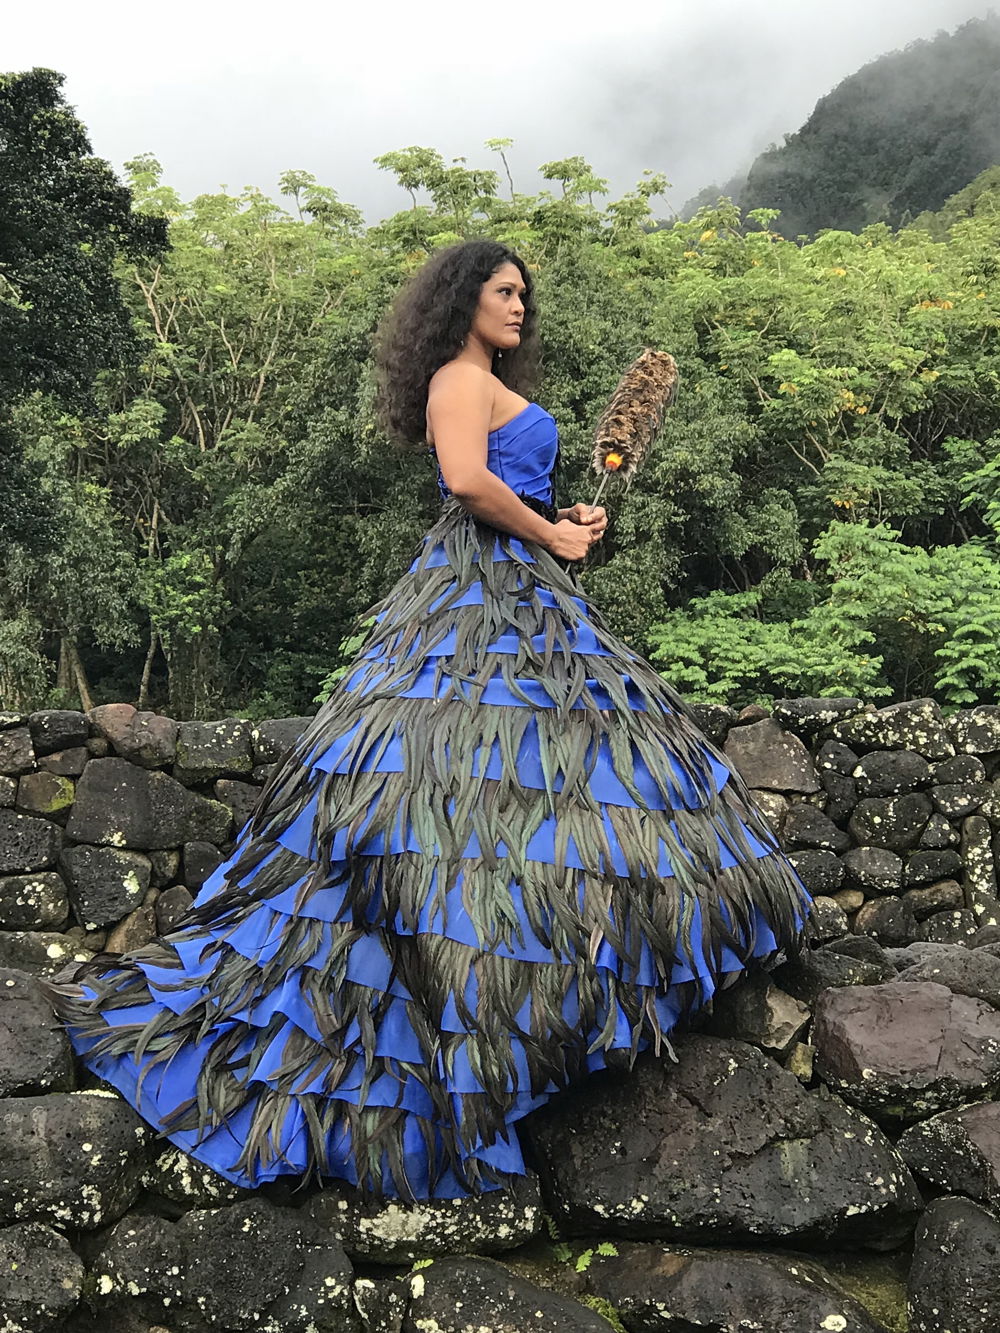 Standing on black rocks and backdropped by mountainous trees, a model with tan skin and long curly black hair models a royal blue ball gown circled with rows of long greyish green feathers.